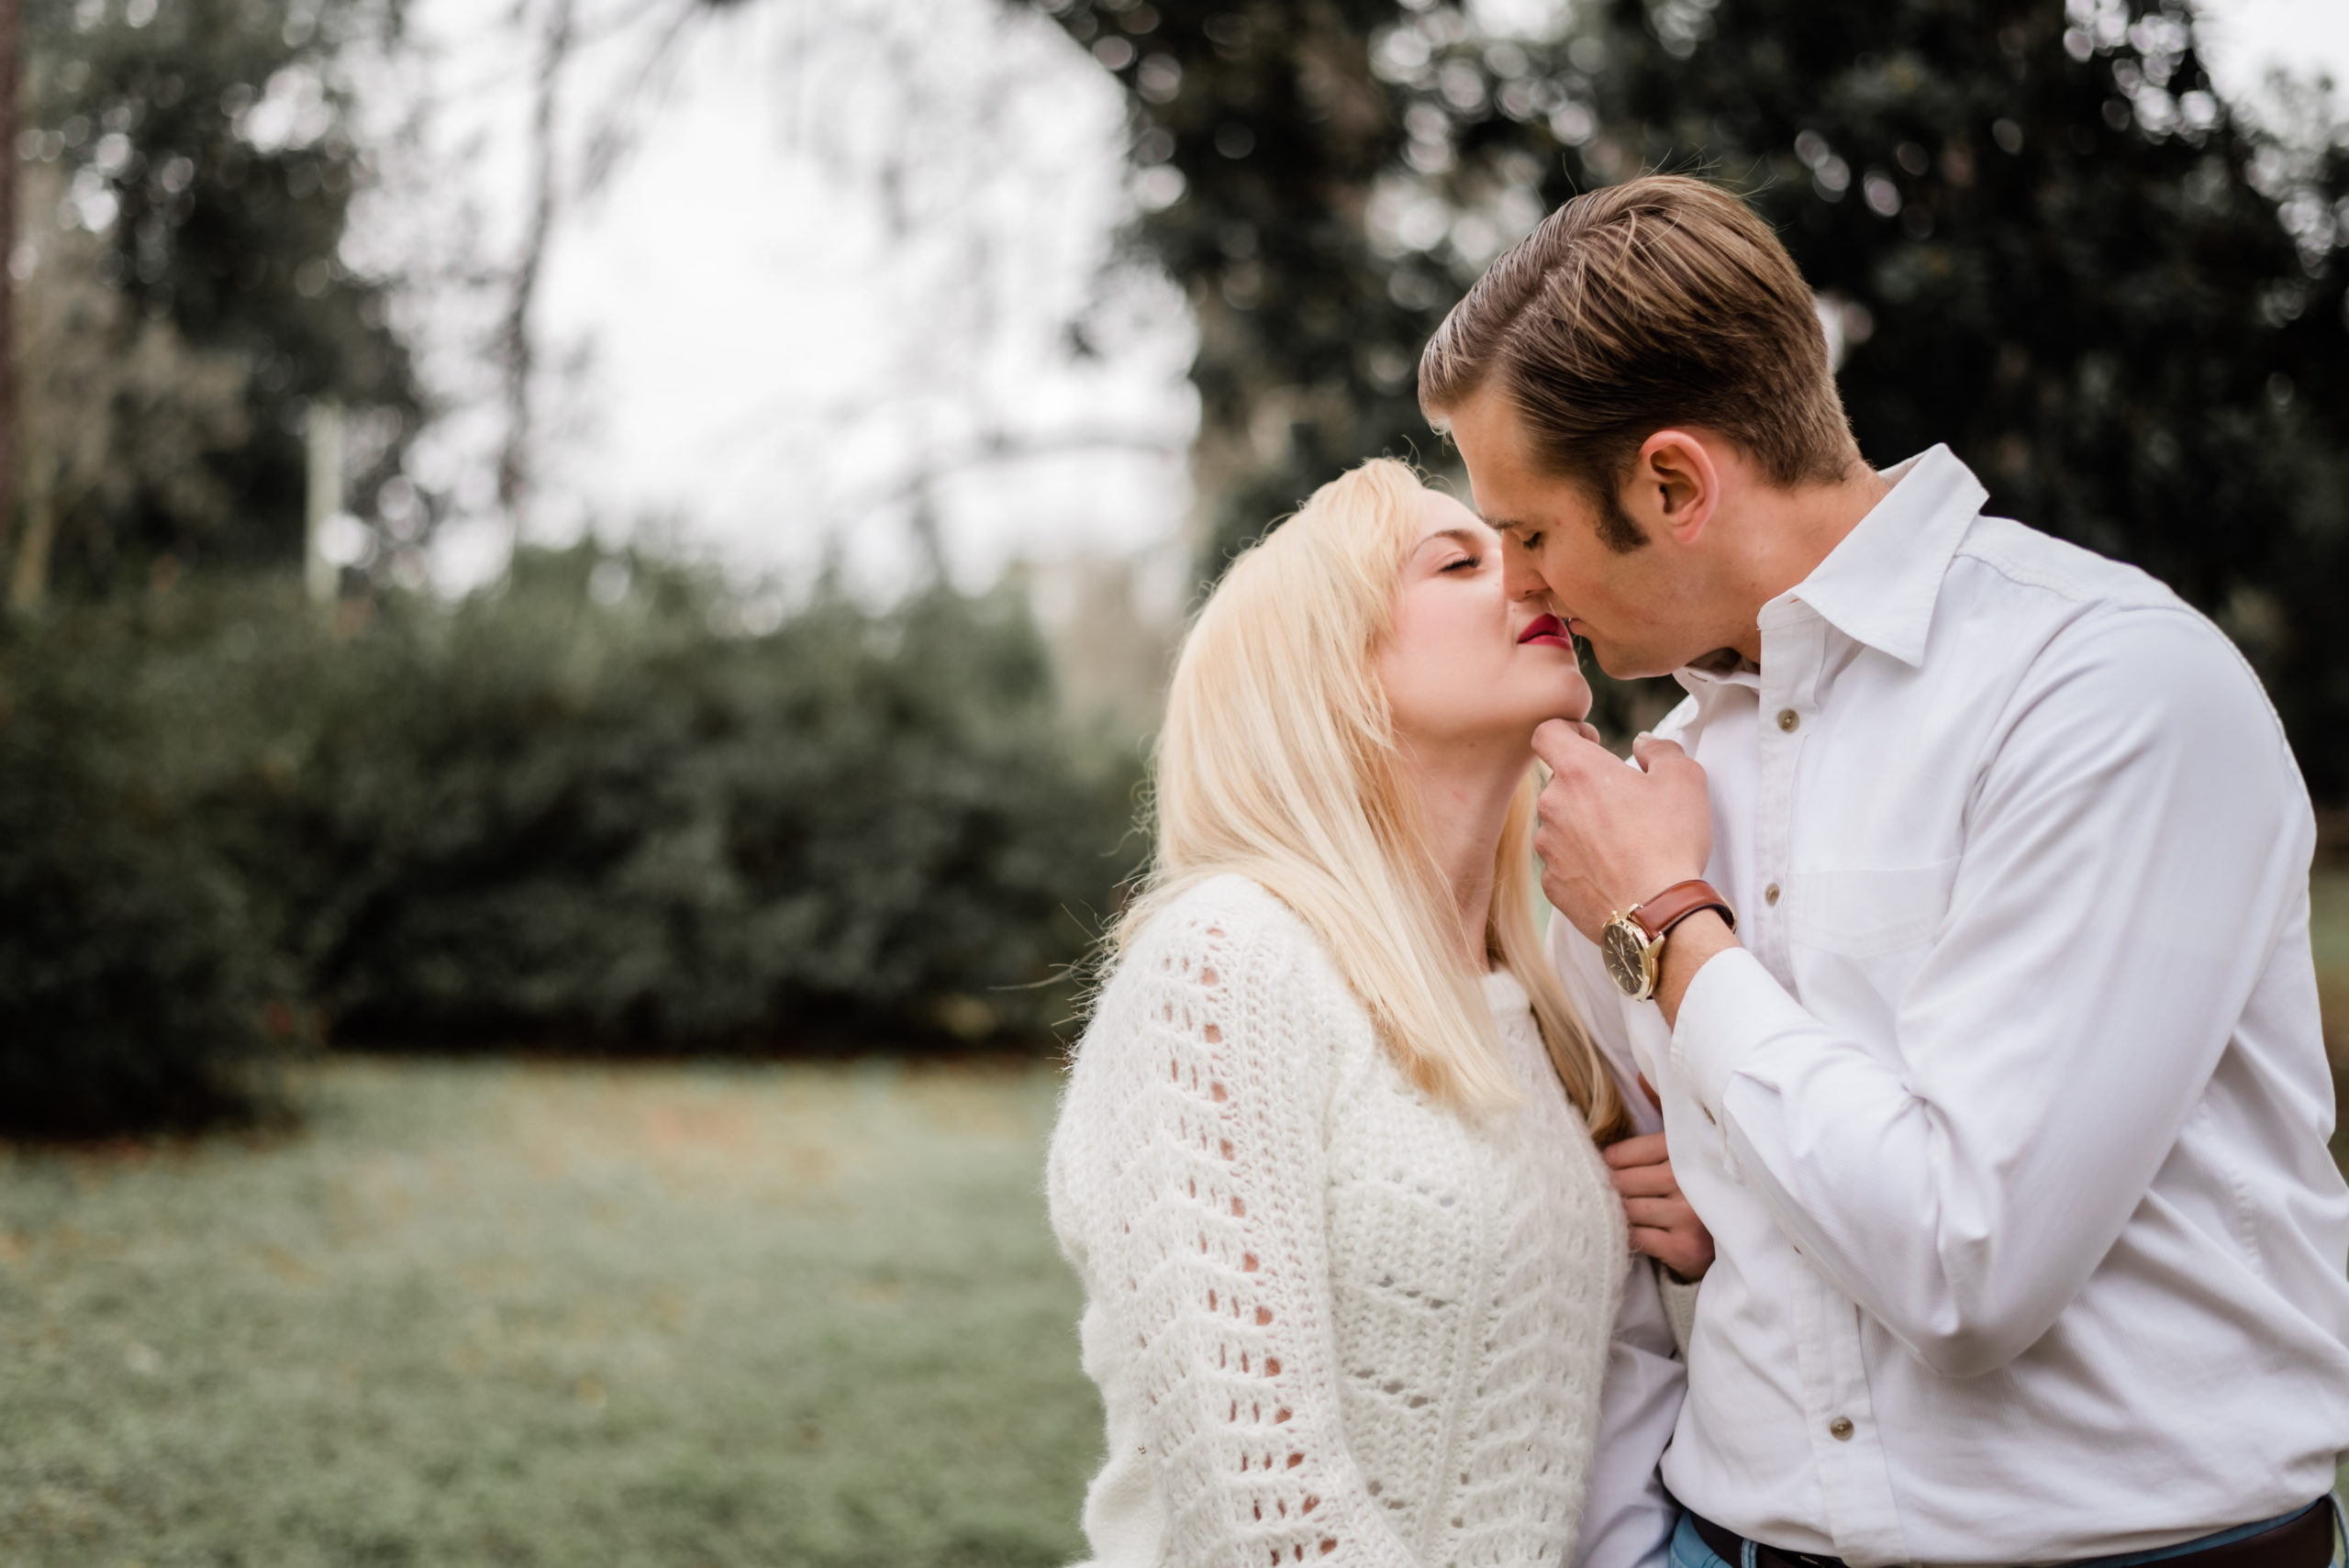 couples Engagement photos at heritage park and gardens in live oak Florida by Black tie and co